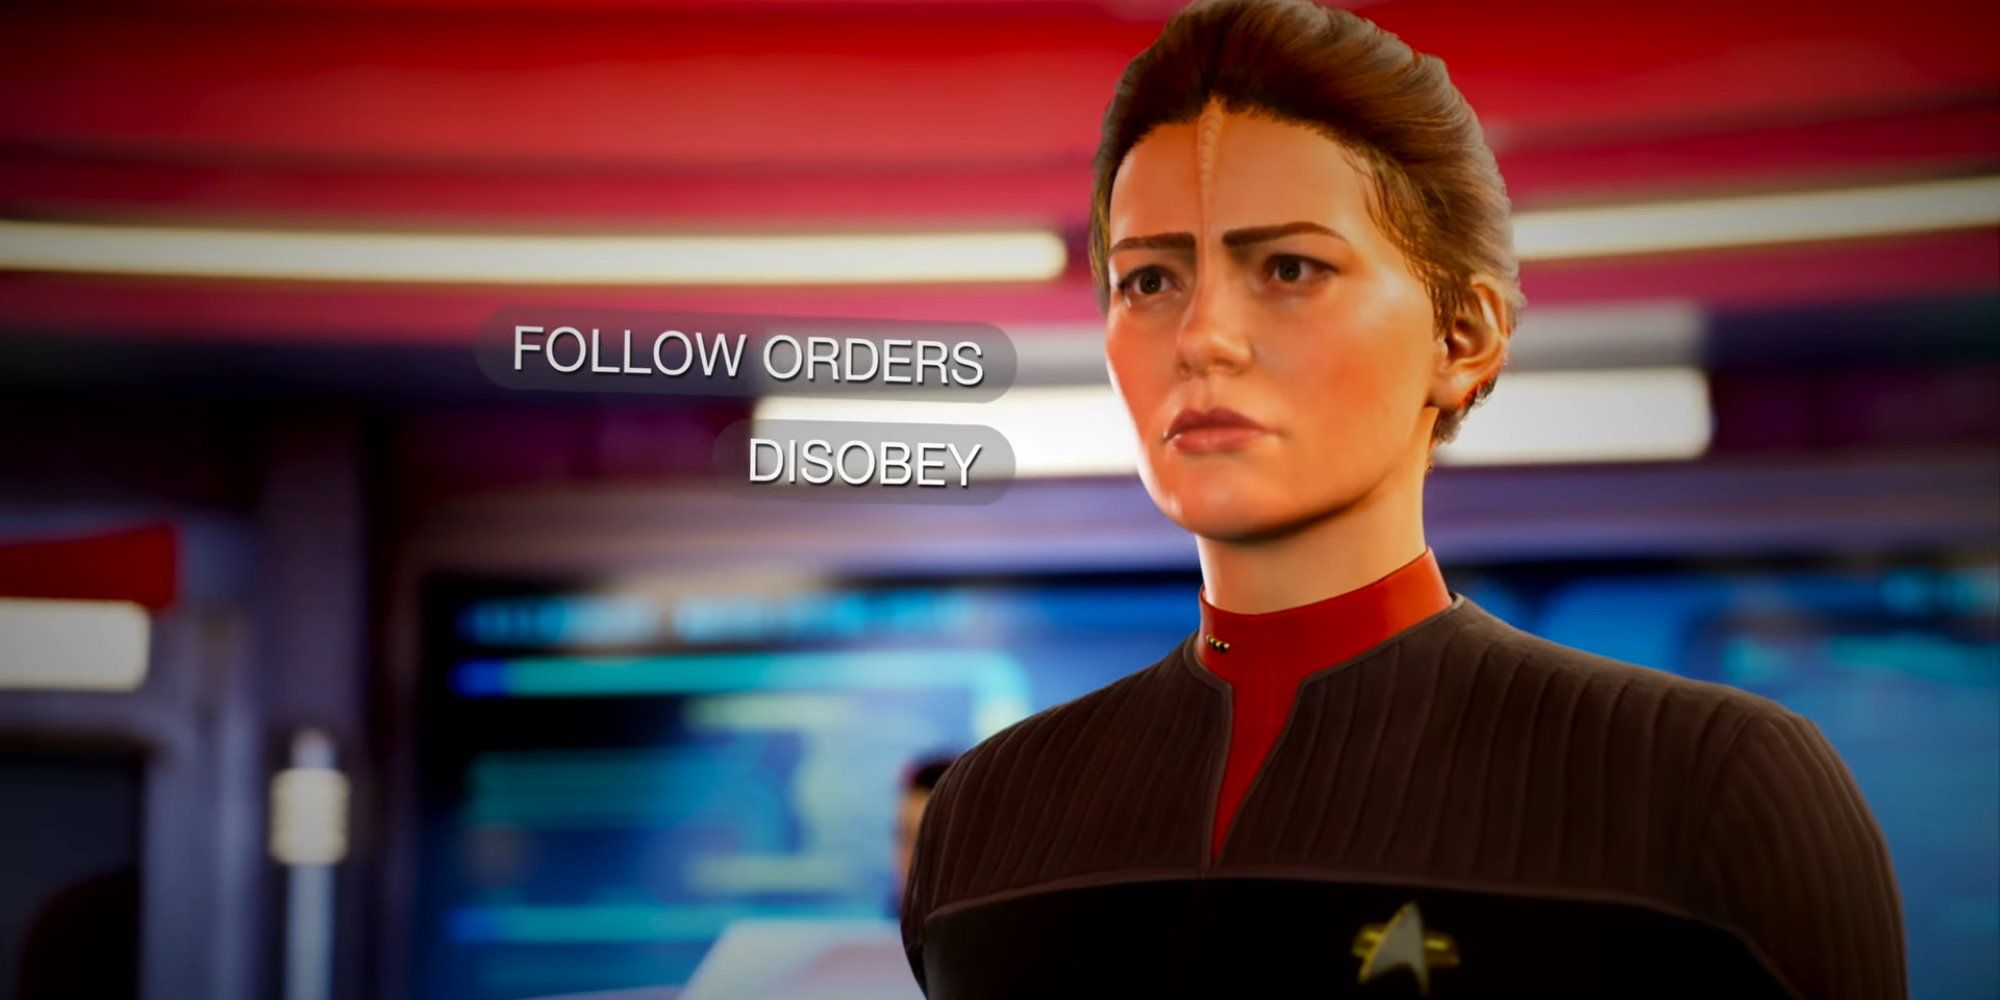 Main character Jara Rydek having to choose to disobey or follow the orders she was given in Star Trek: Resurgence.